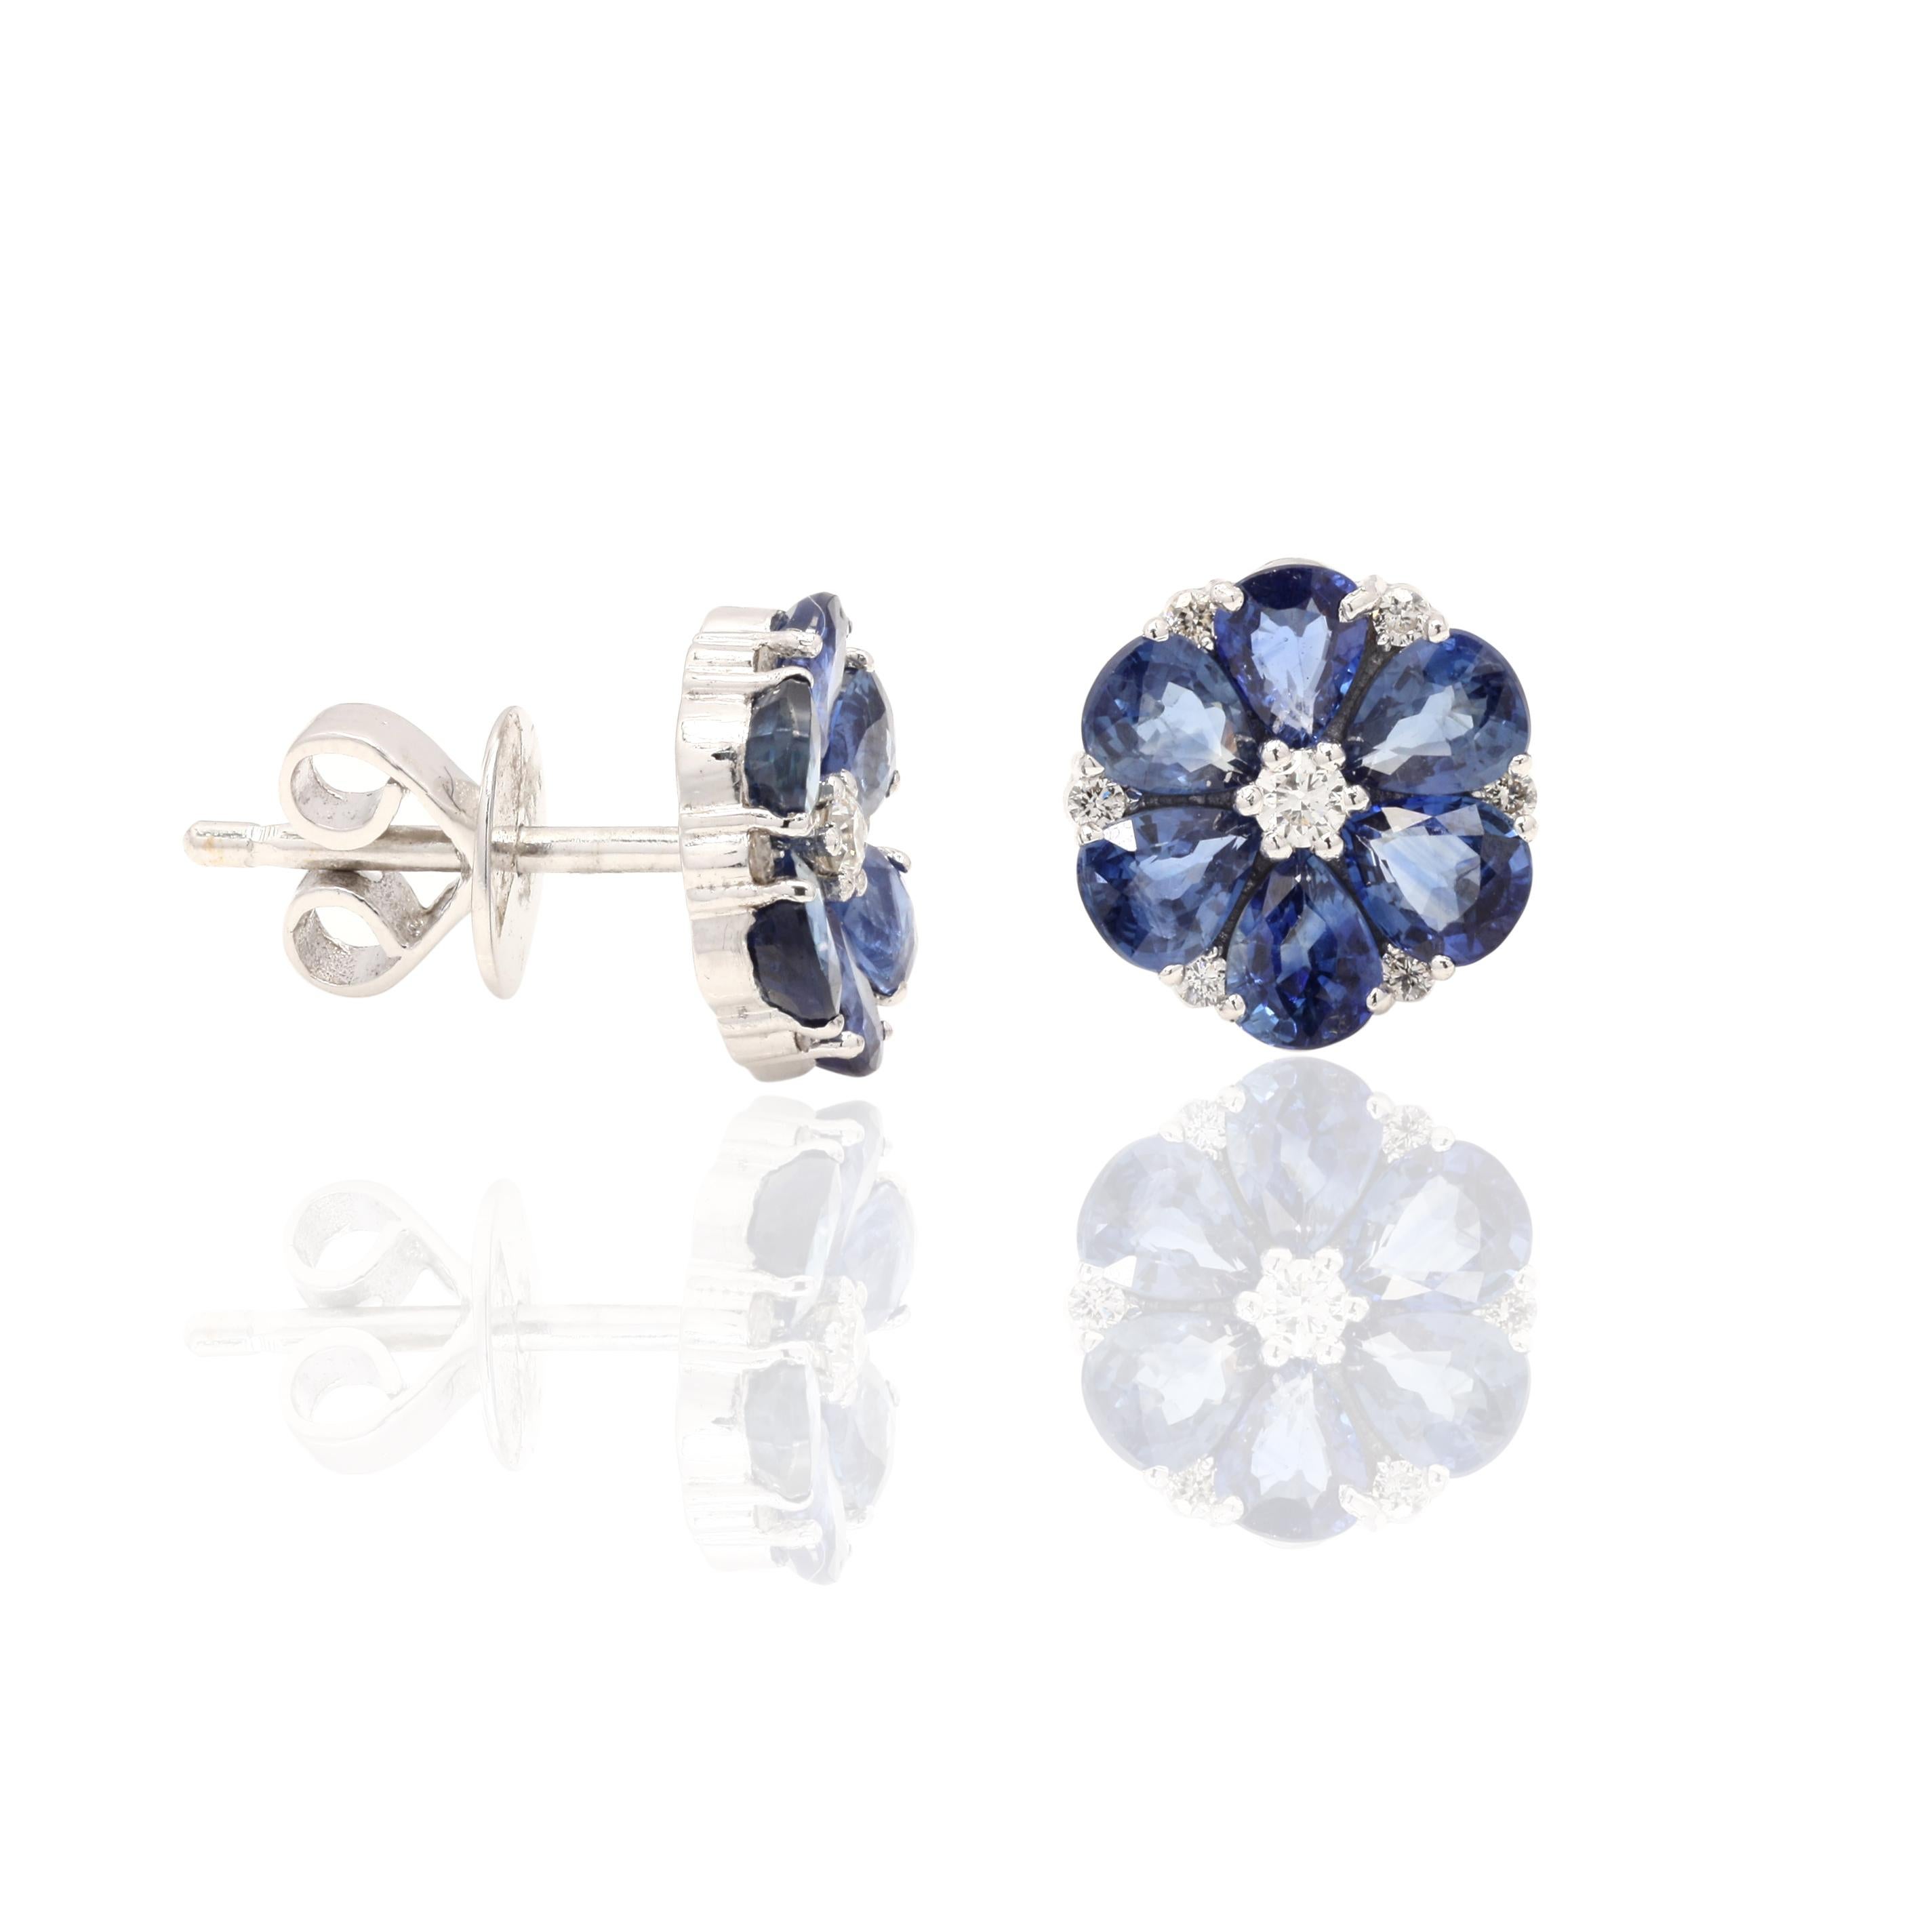 Floral Sapphire Stud Earrings with Diamonds in 18K White Gold. Embrace your look with these stunning pair of earrings suitable for any occasion to complete your outfit.
Studs create a subtle beauty while showcasing the colors of the natural precious